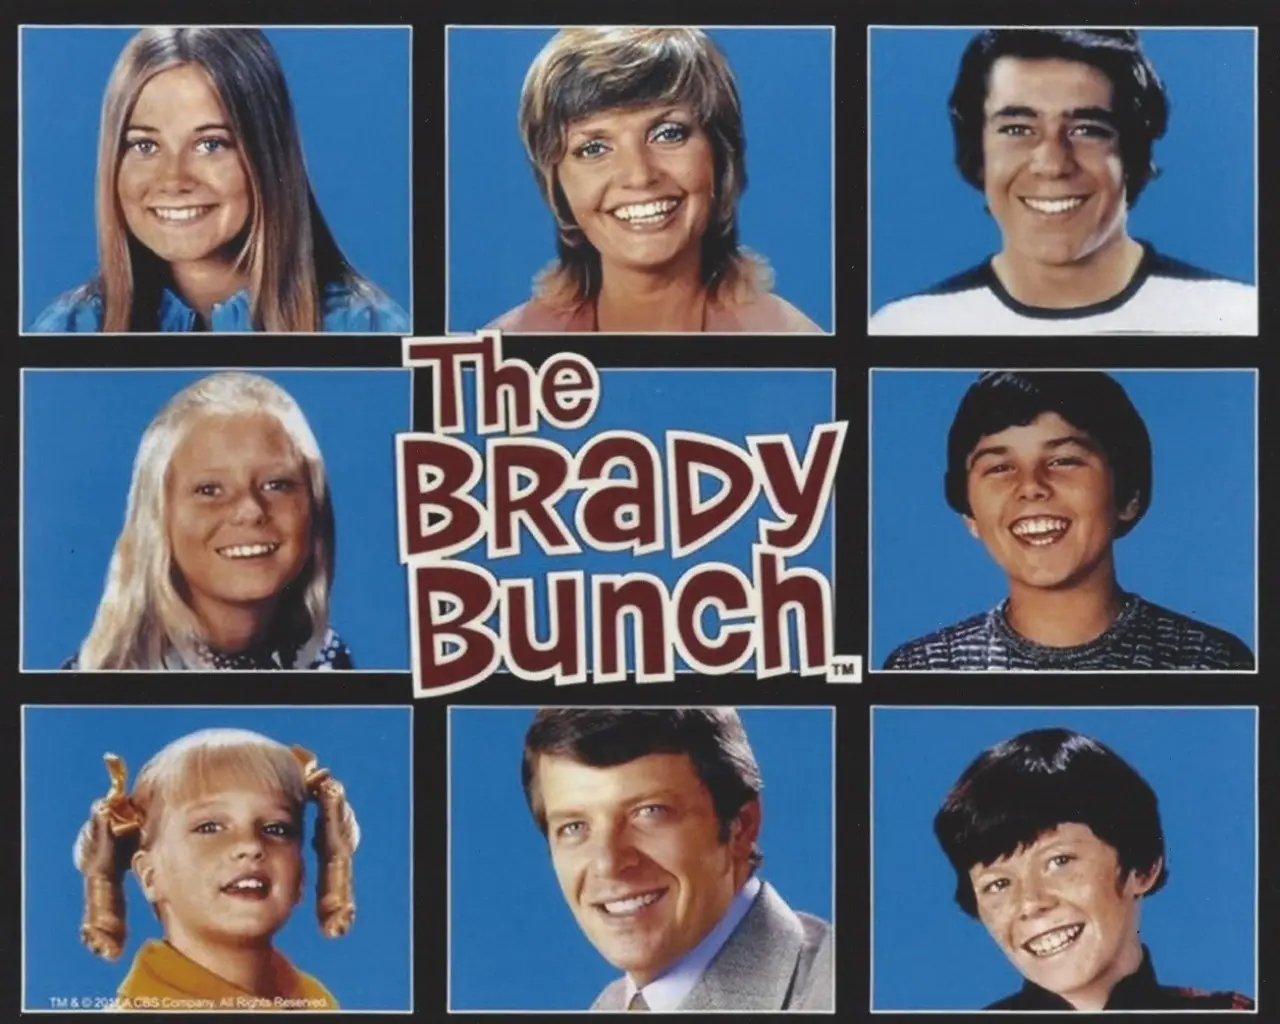 A bunch of people are smiling for the brady bunch.